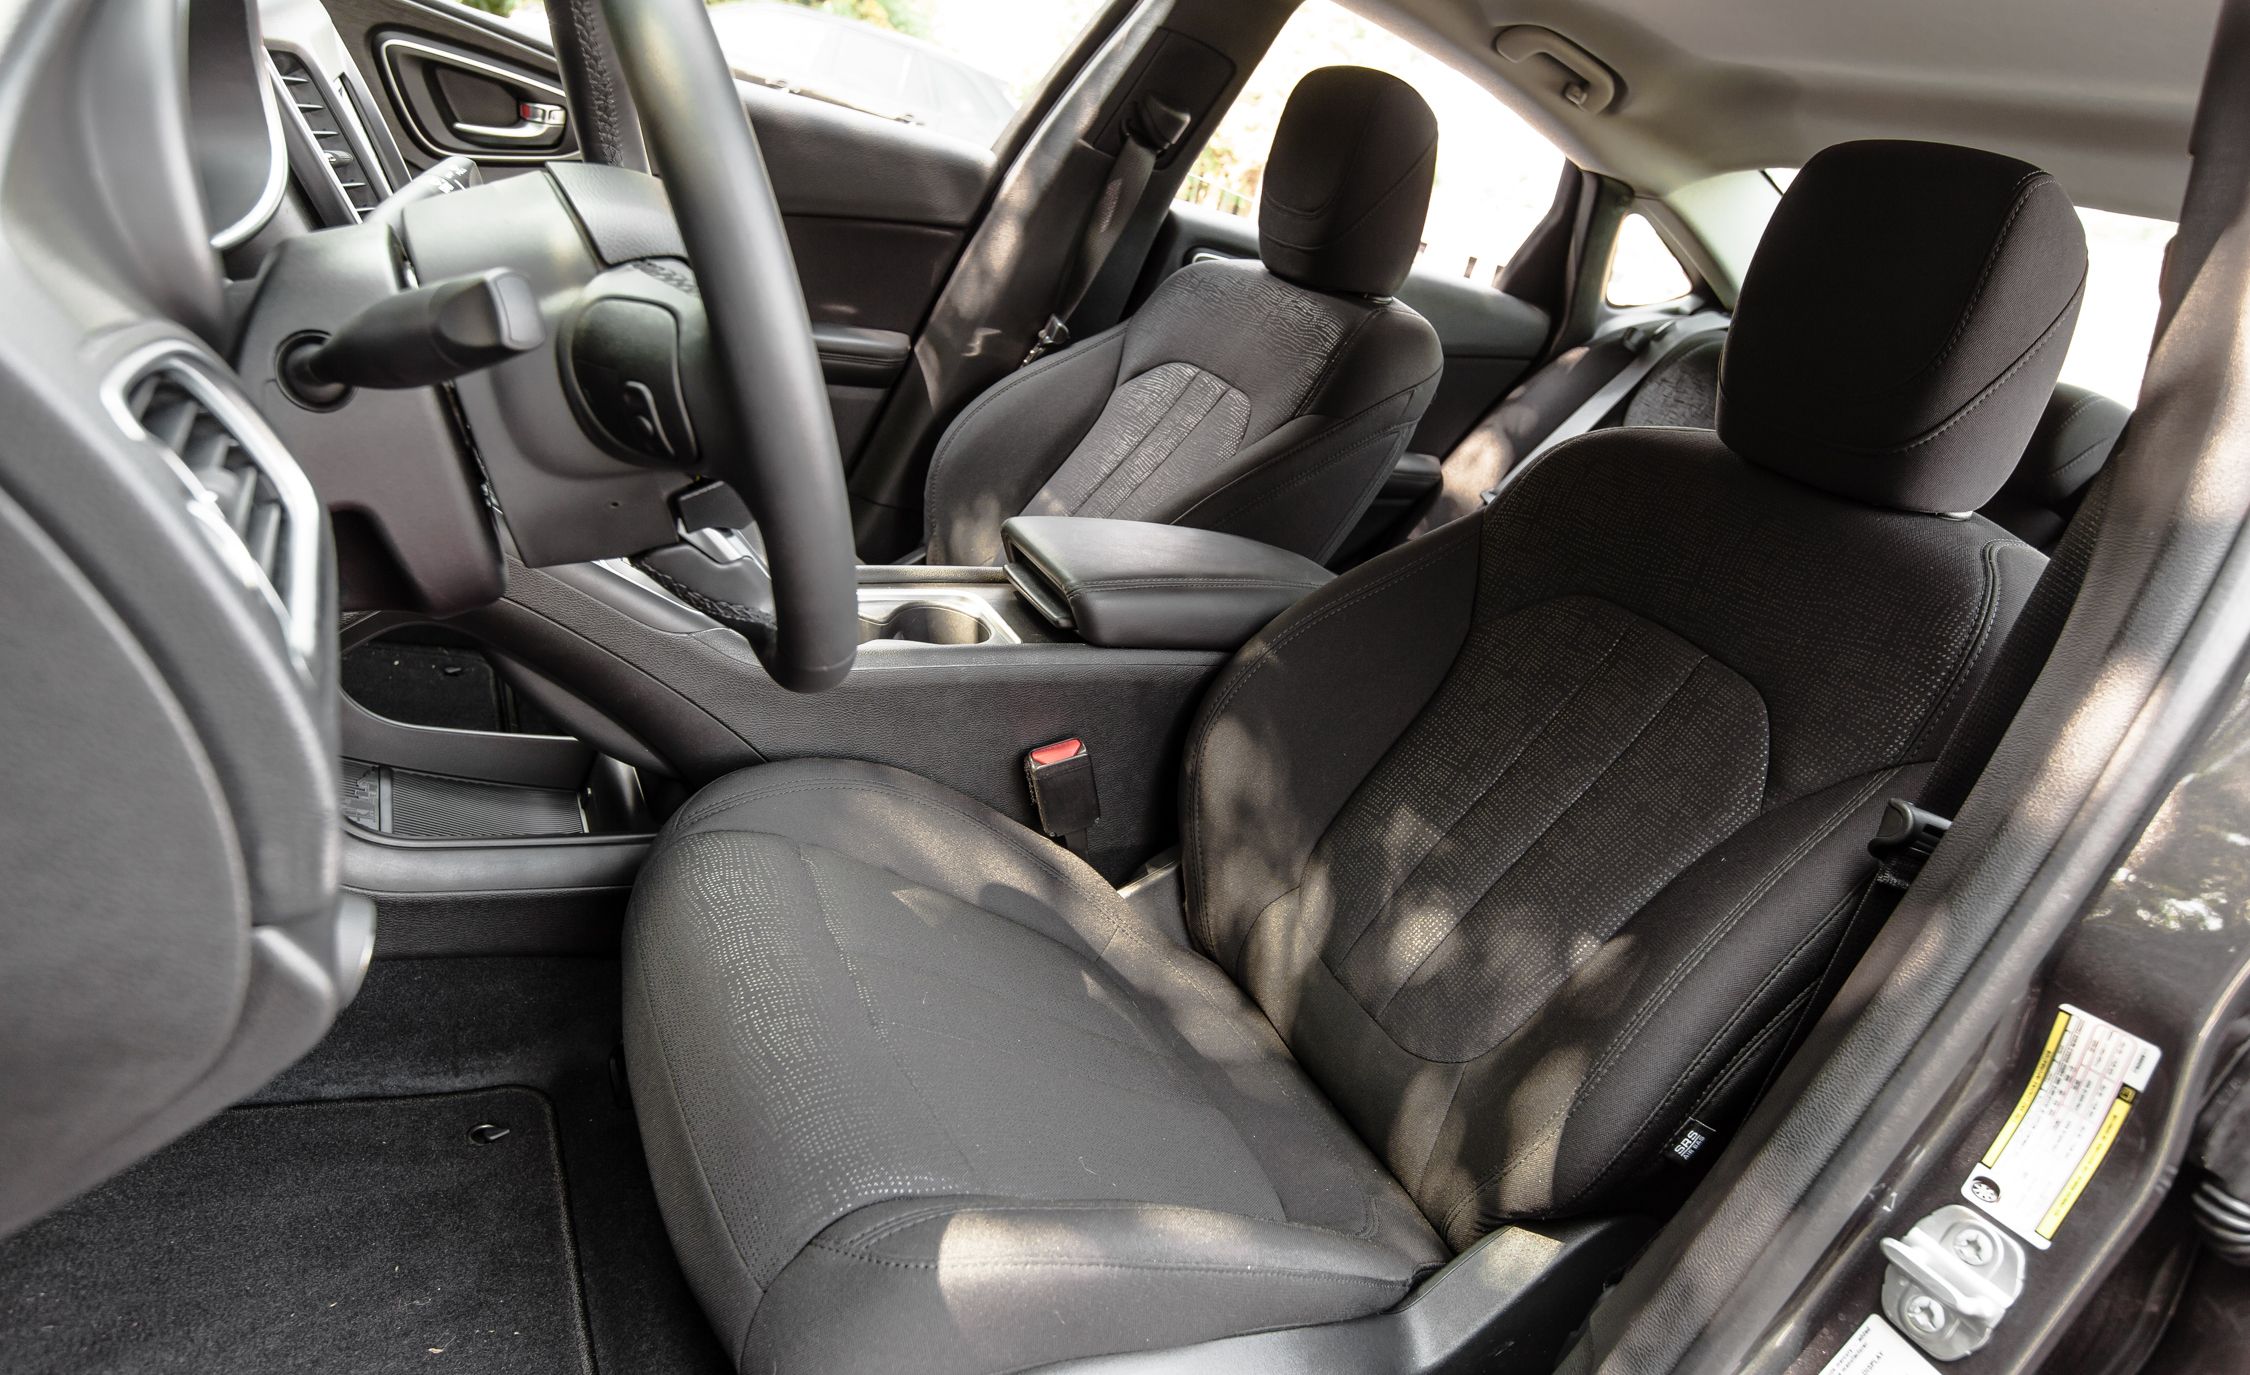 2015 Chrysler 200 Limited Interior (View 7 of 19)